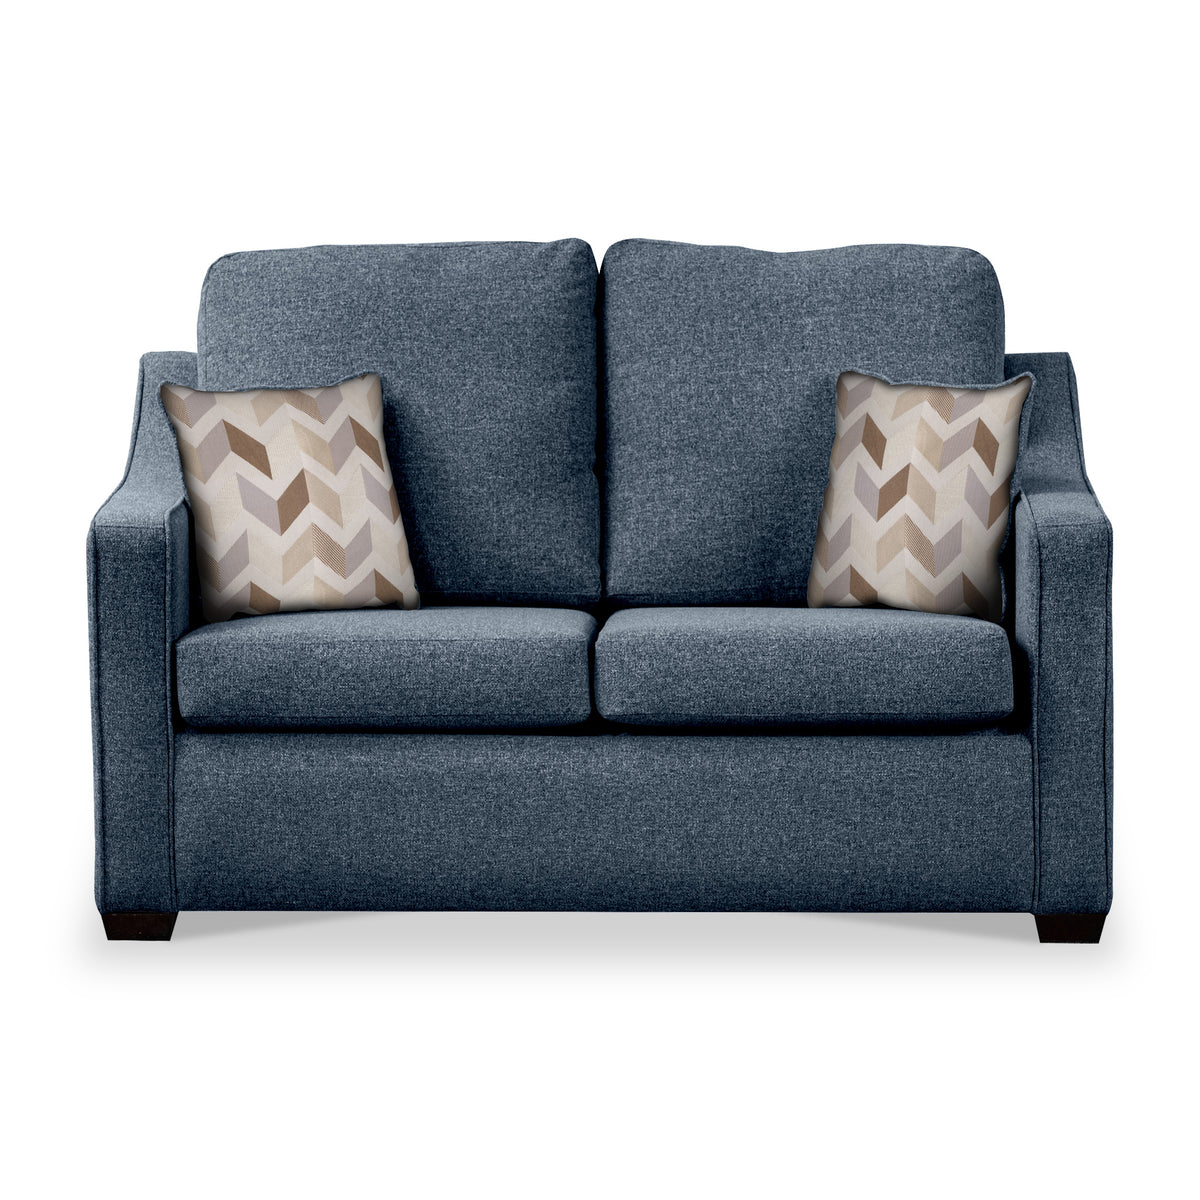 Fenton Midnight Soft Weave 2 Seater Sofabed with Oatmeal Scatter Cushions from Roseland Furniture